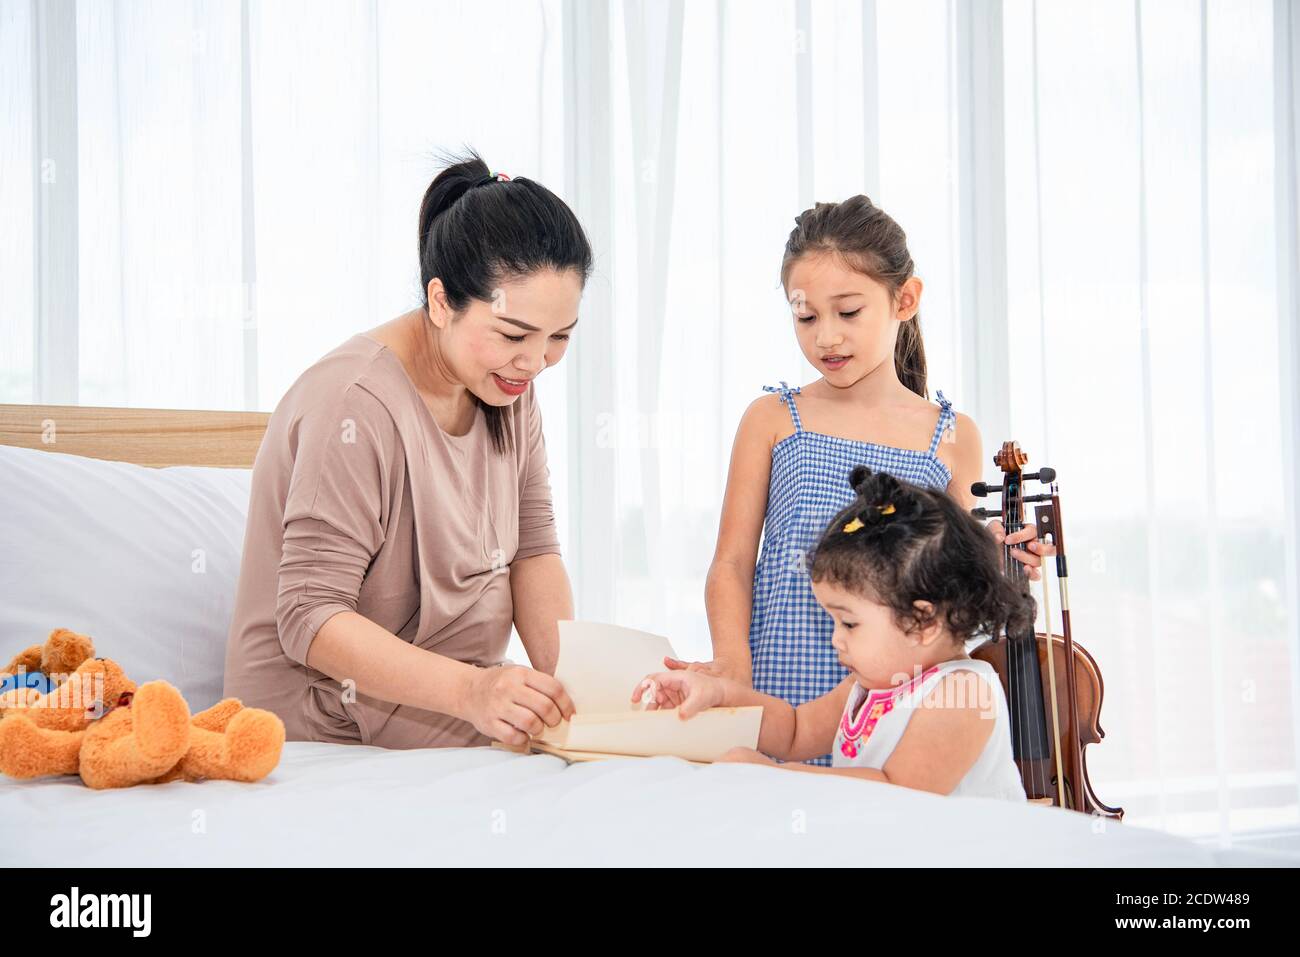 Asian mother teaching mixed raced girls daughter to reading books in their house. Quarantine in home concept. Happy family theme. Stock Photo